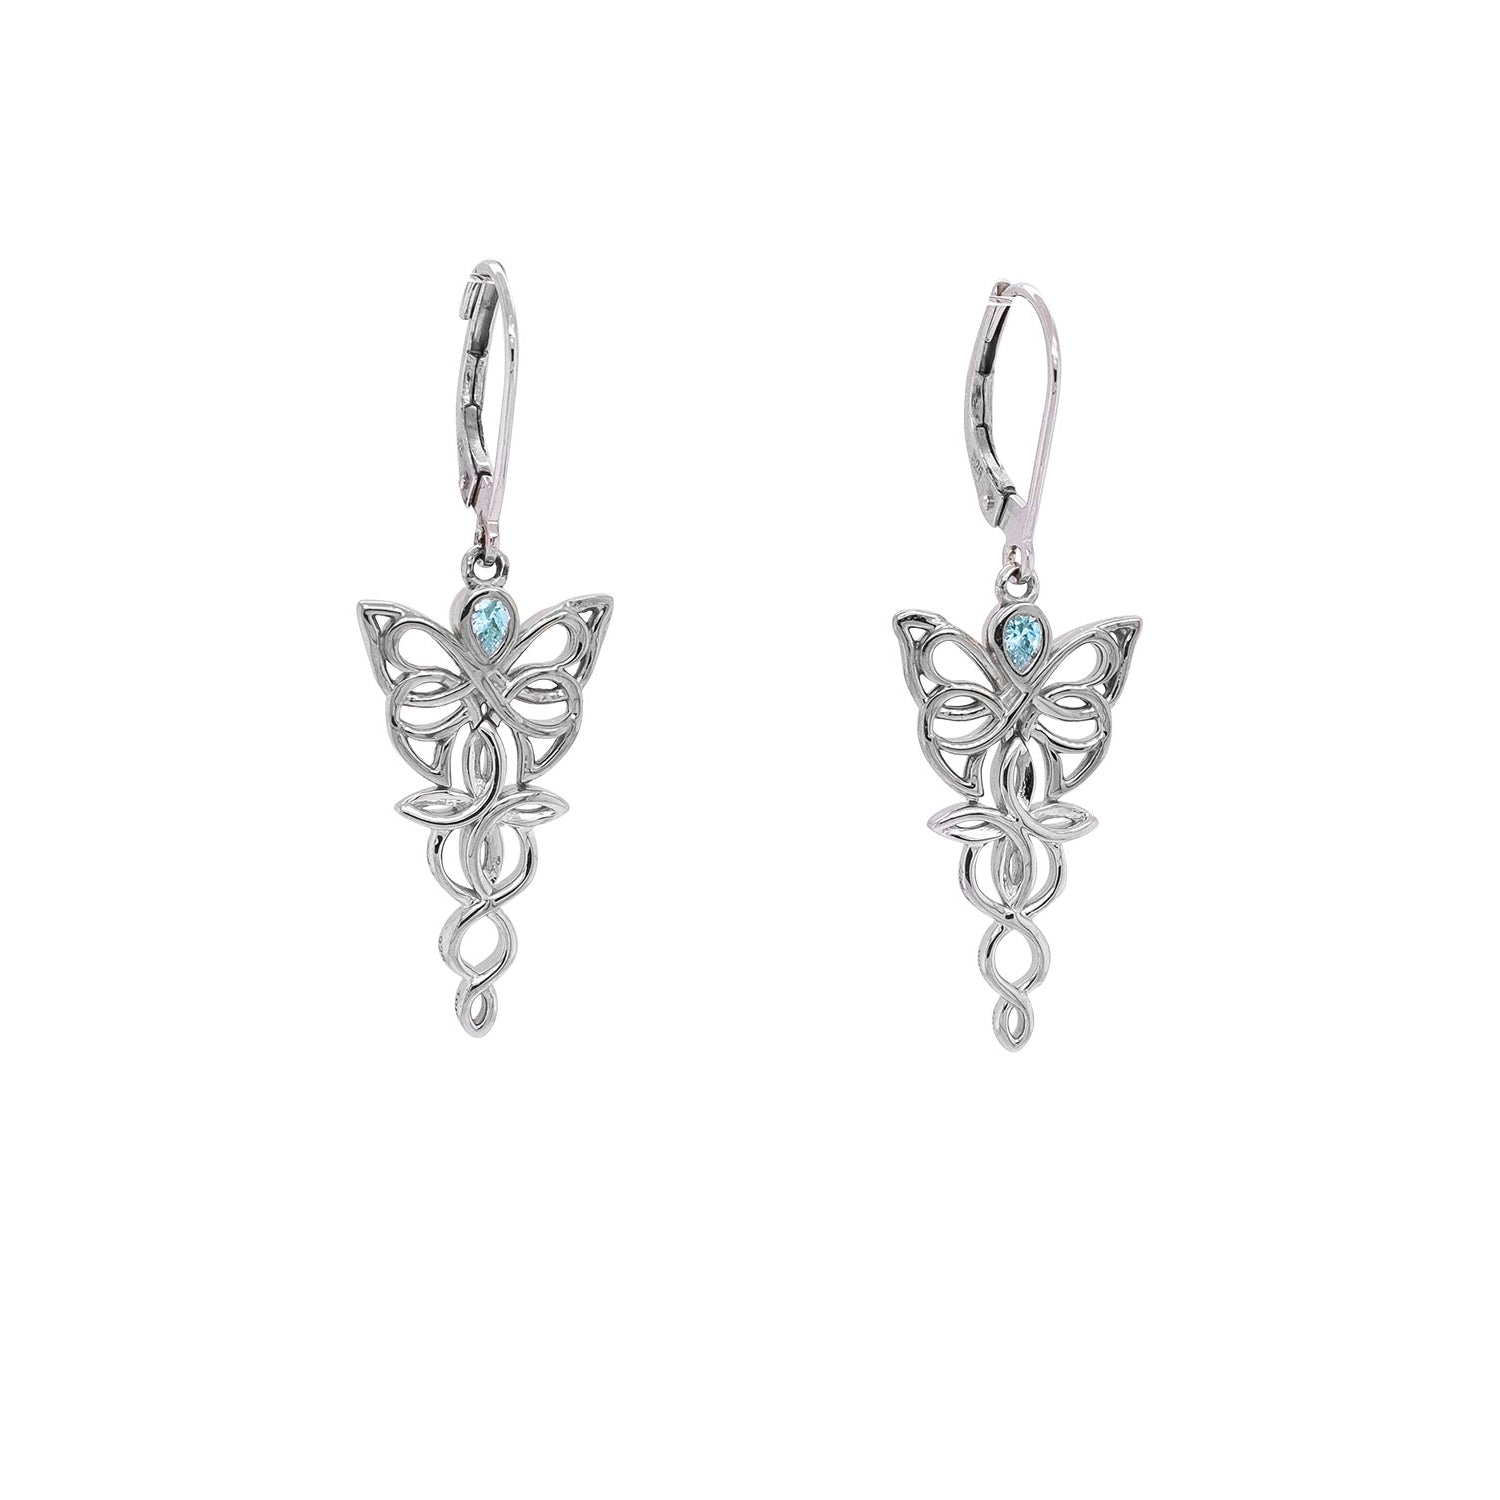 Earrings Rhodium Sky Blue Topaz Butterfly Leverback Earrings from welch and company jewelers near syracuse ny 